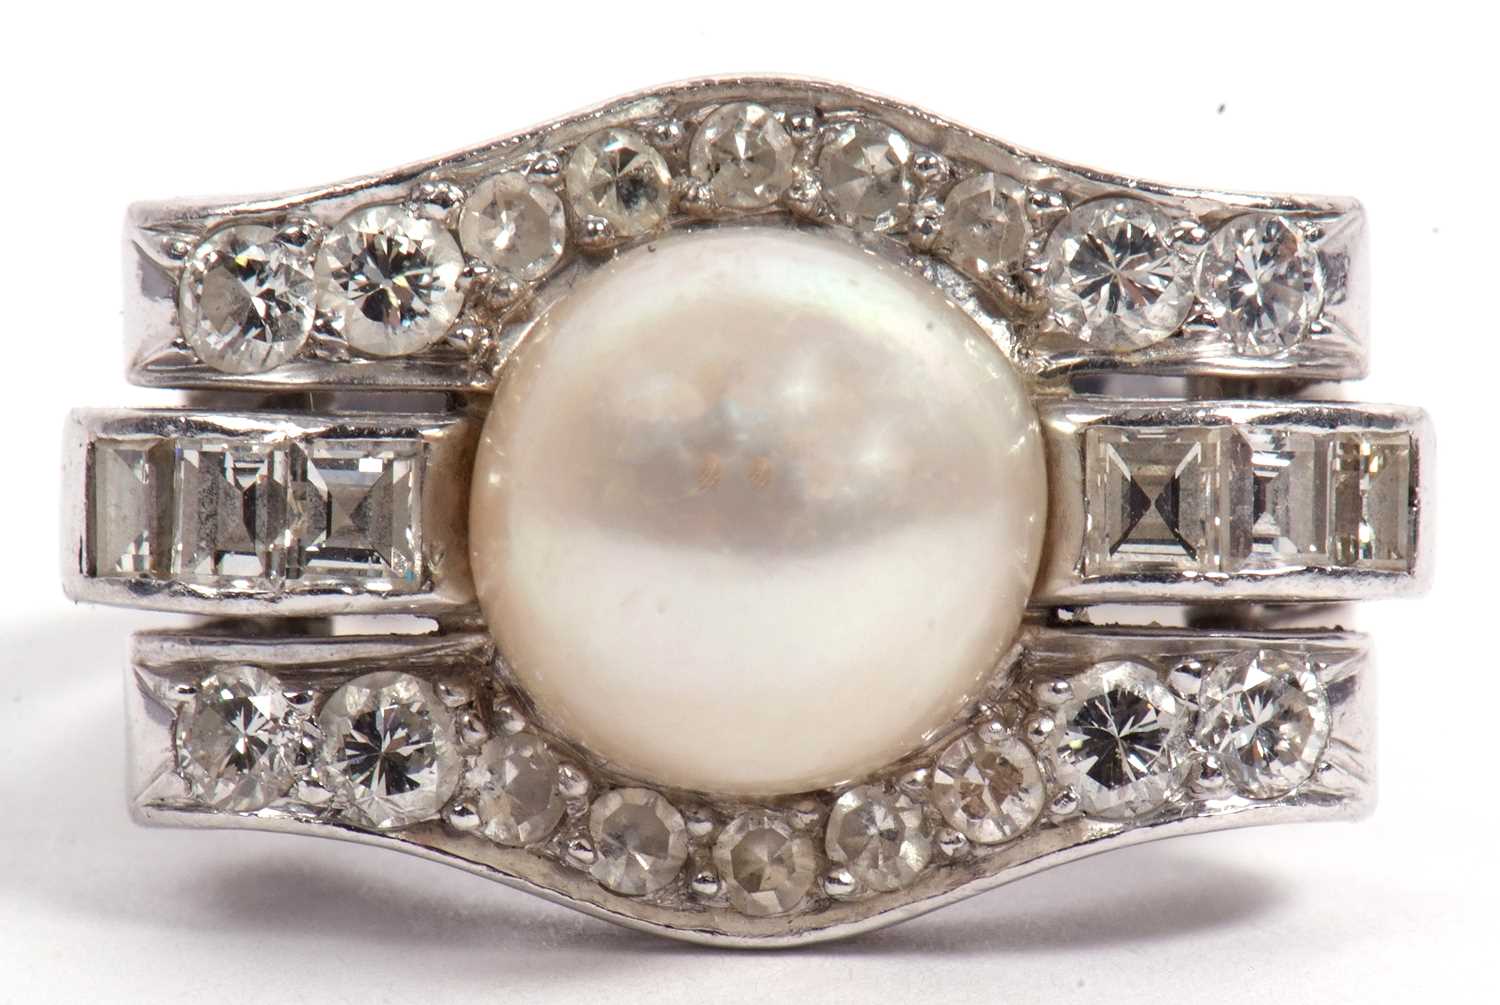 Precious metal pearl and diamond cocktail ring centering a cultured pearl (8mm diameter), raised - Image 3 of 8